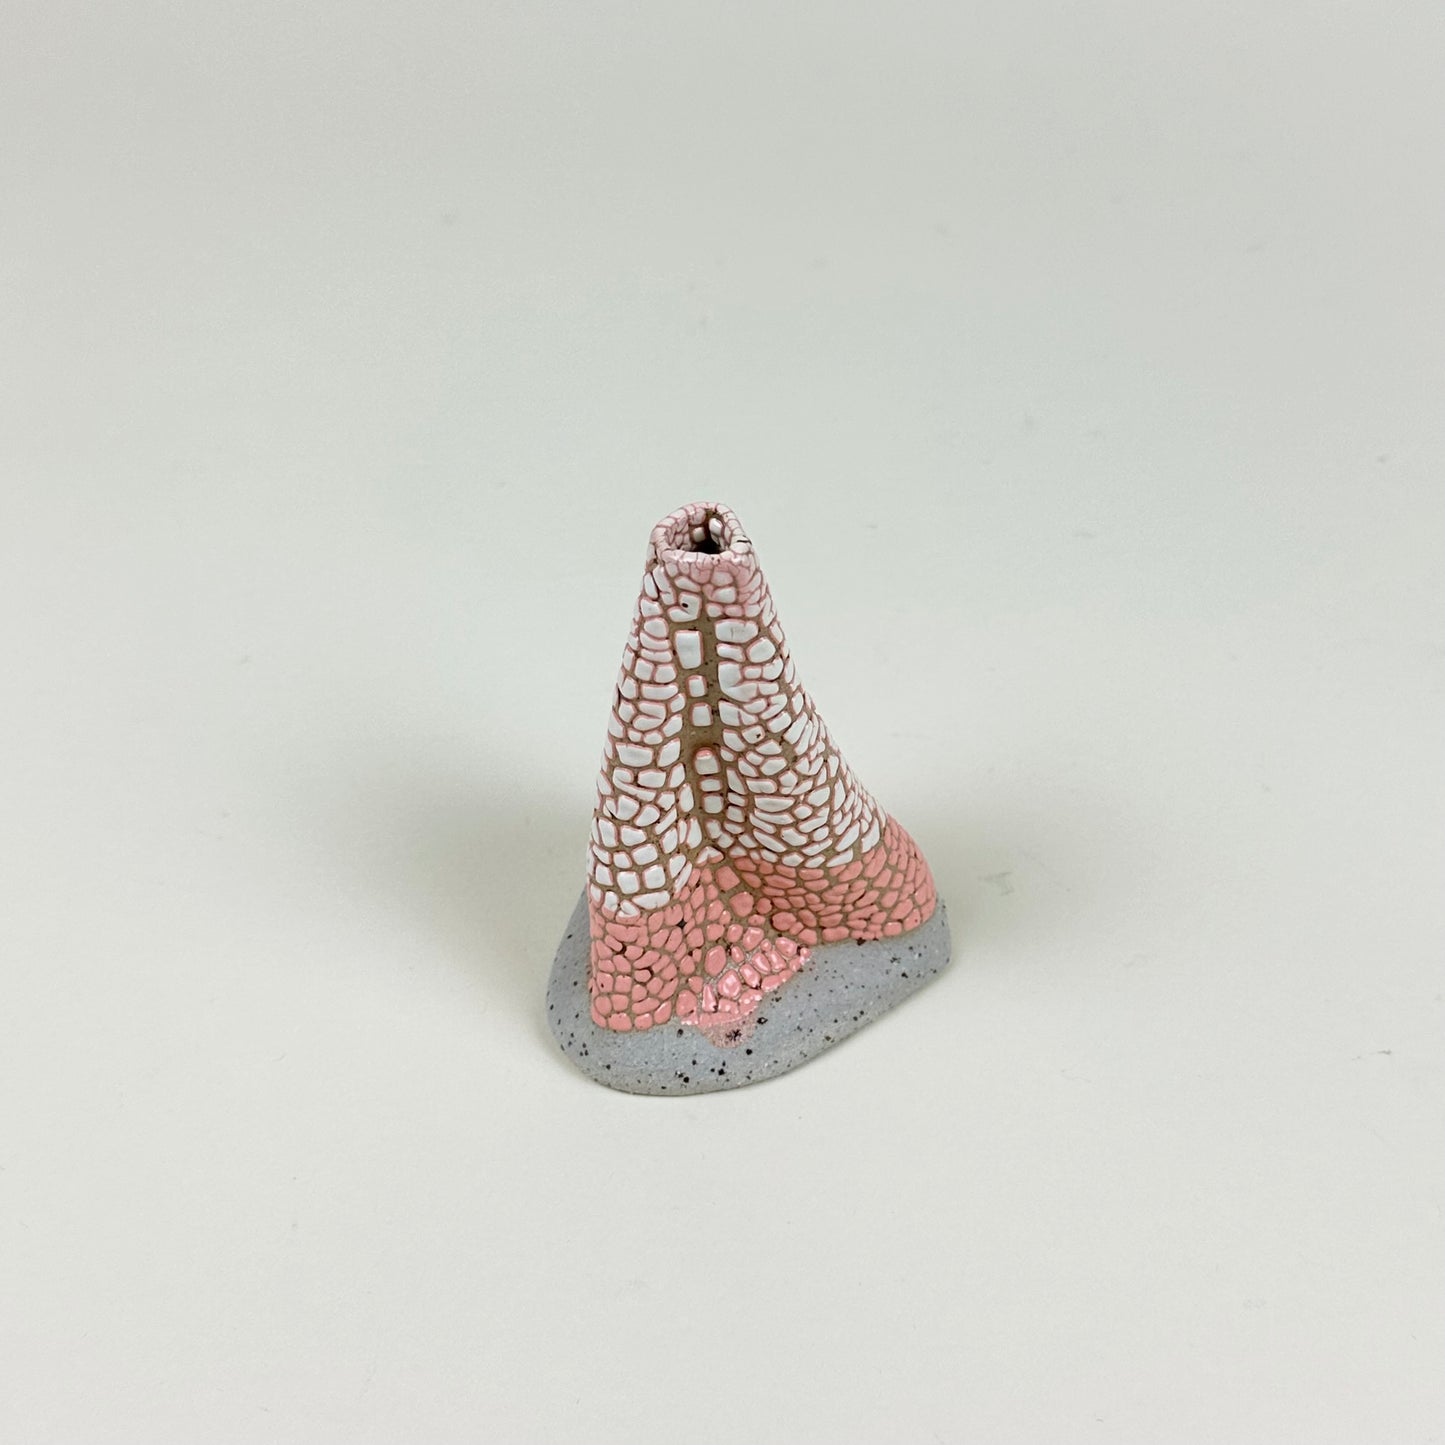 Light pink and pink volcano vase (S) by Astrid Öhman.